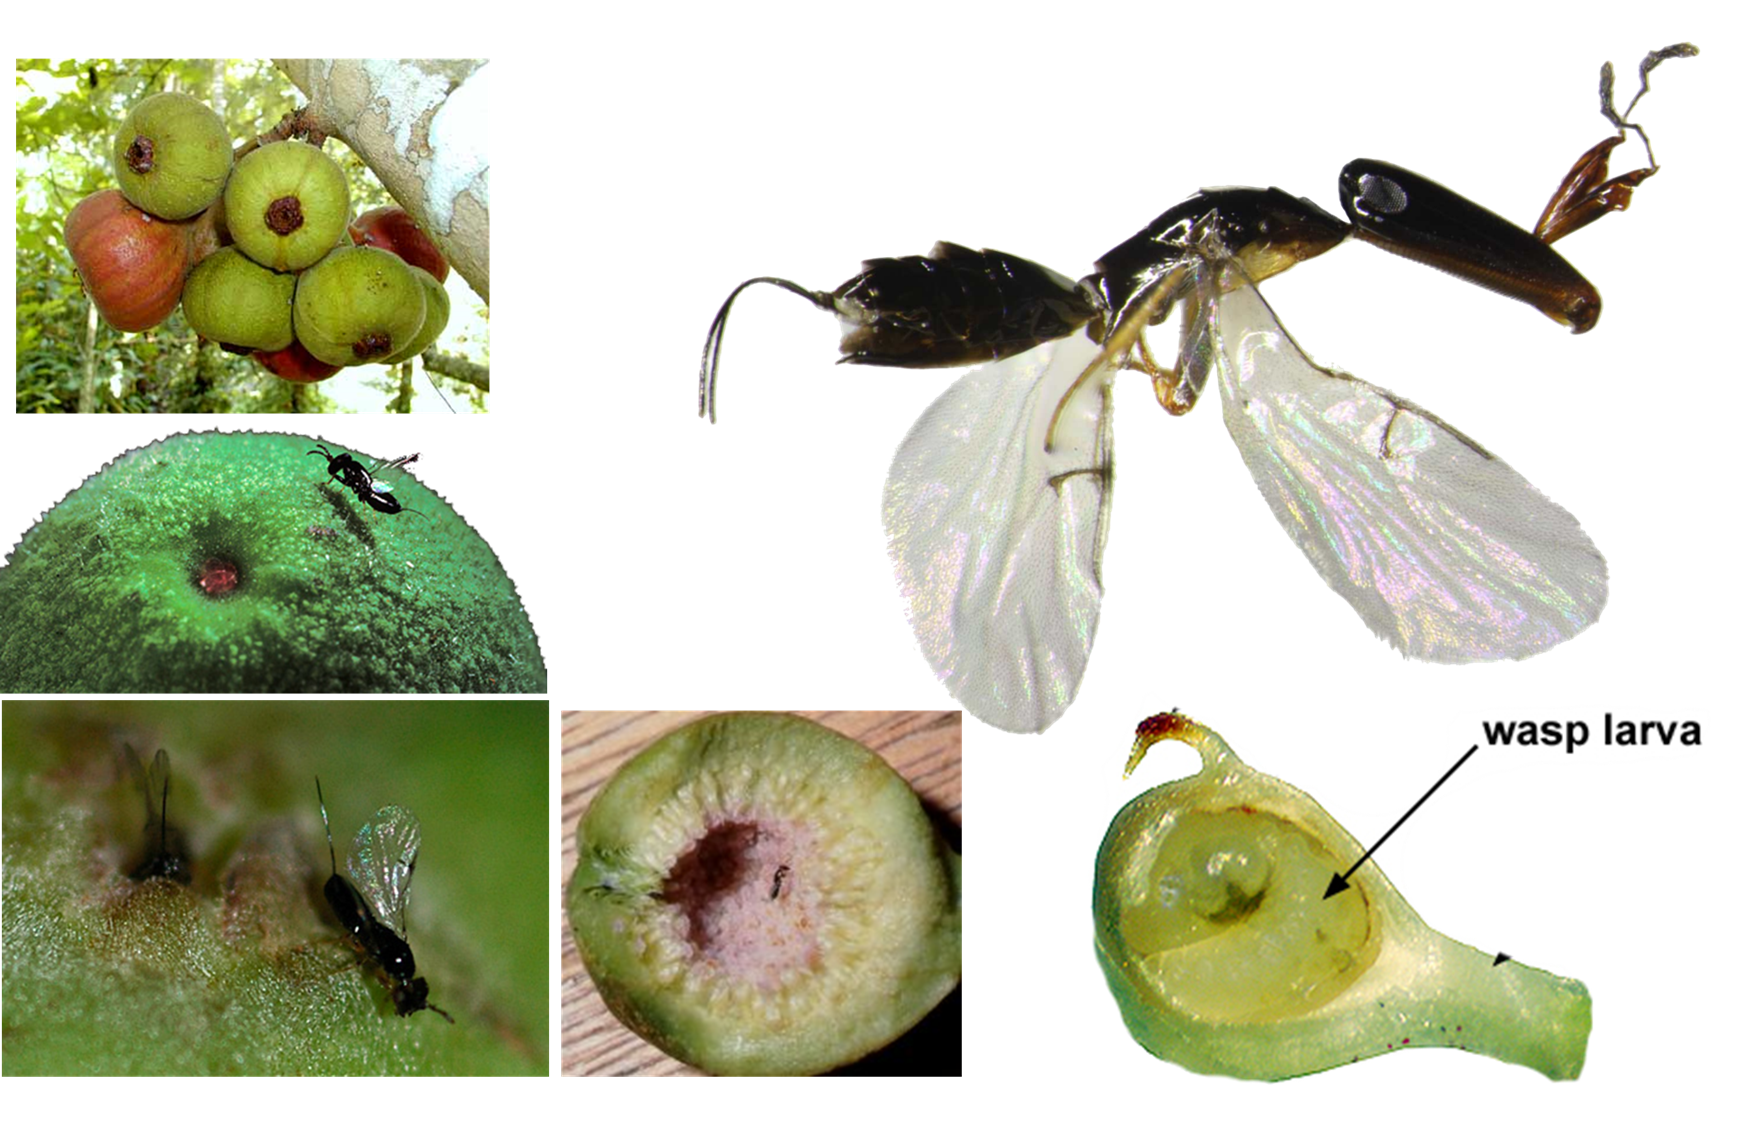 <p>Coevolution can produce extraordinary adaptations and can result in complete dependence on coevolving species on the success of both species partners. Such is the case with the fig wasp consume and spend most of their lives in figs and fig plants that rely on fig wasps to pollinate their flowers. The symbiosis between figs and fig wasps is an excellent example of a _______________________. a. hyperparasitoidism b. mutualism c. commensalism d. parasitism</p>